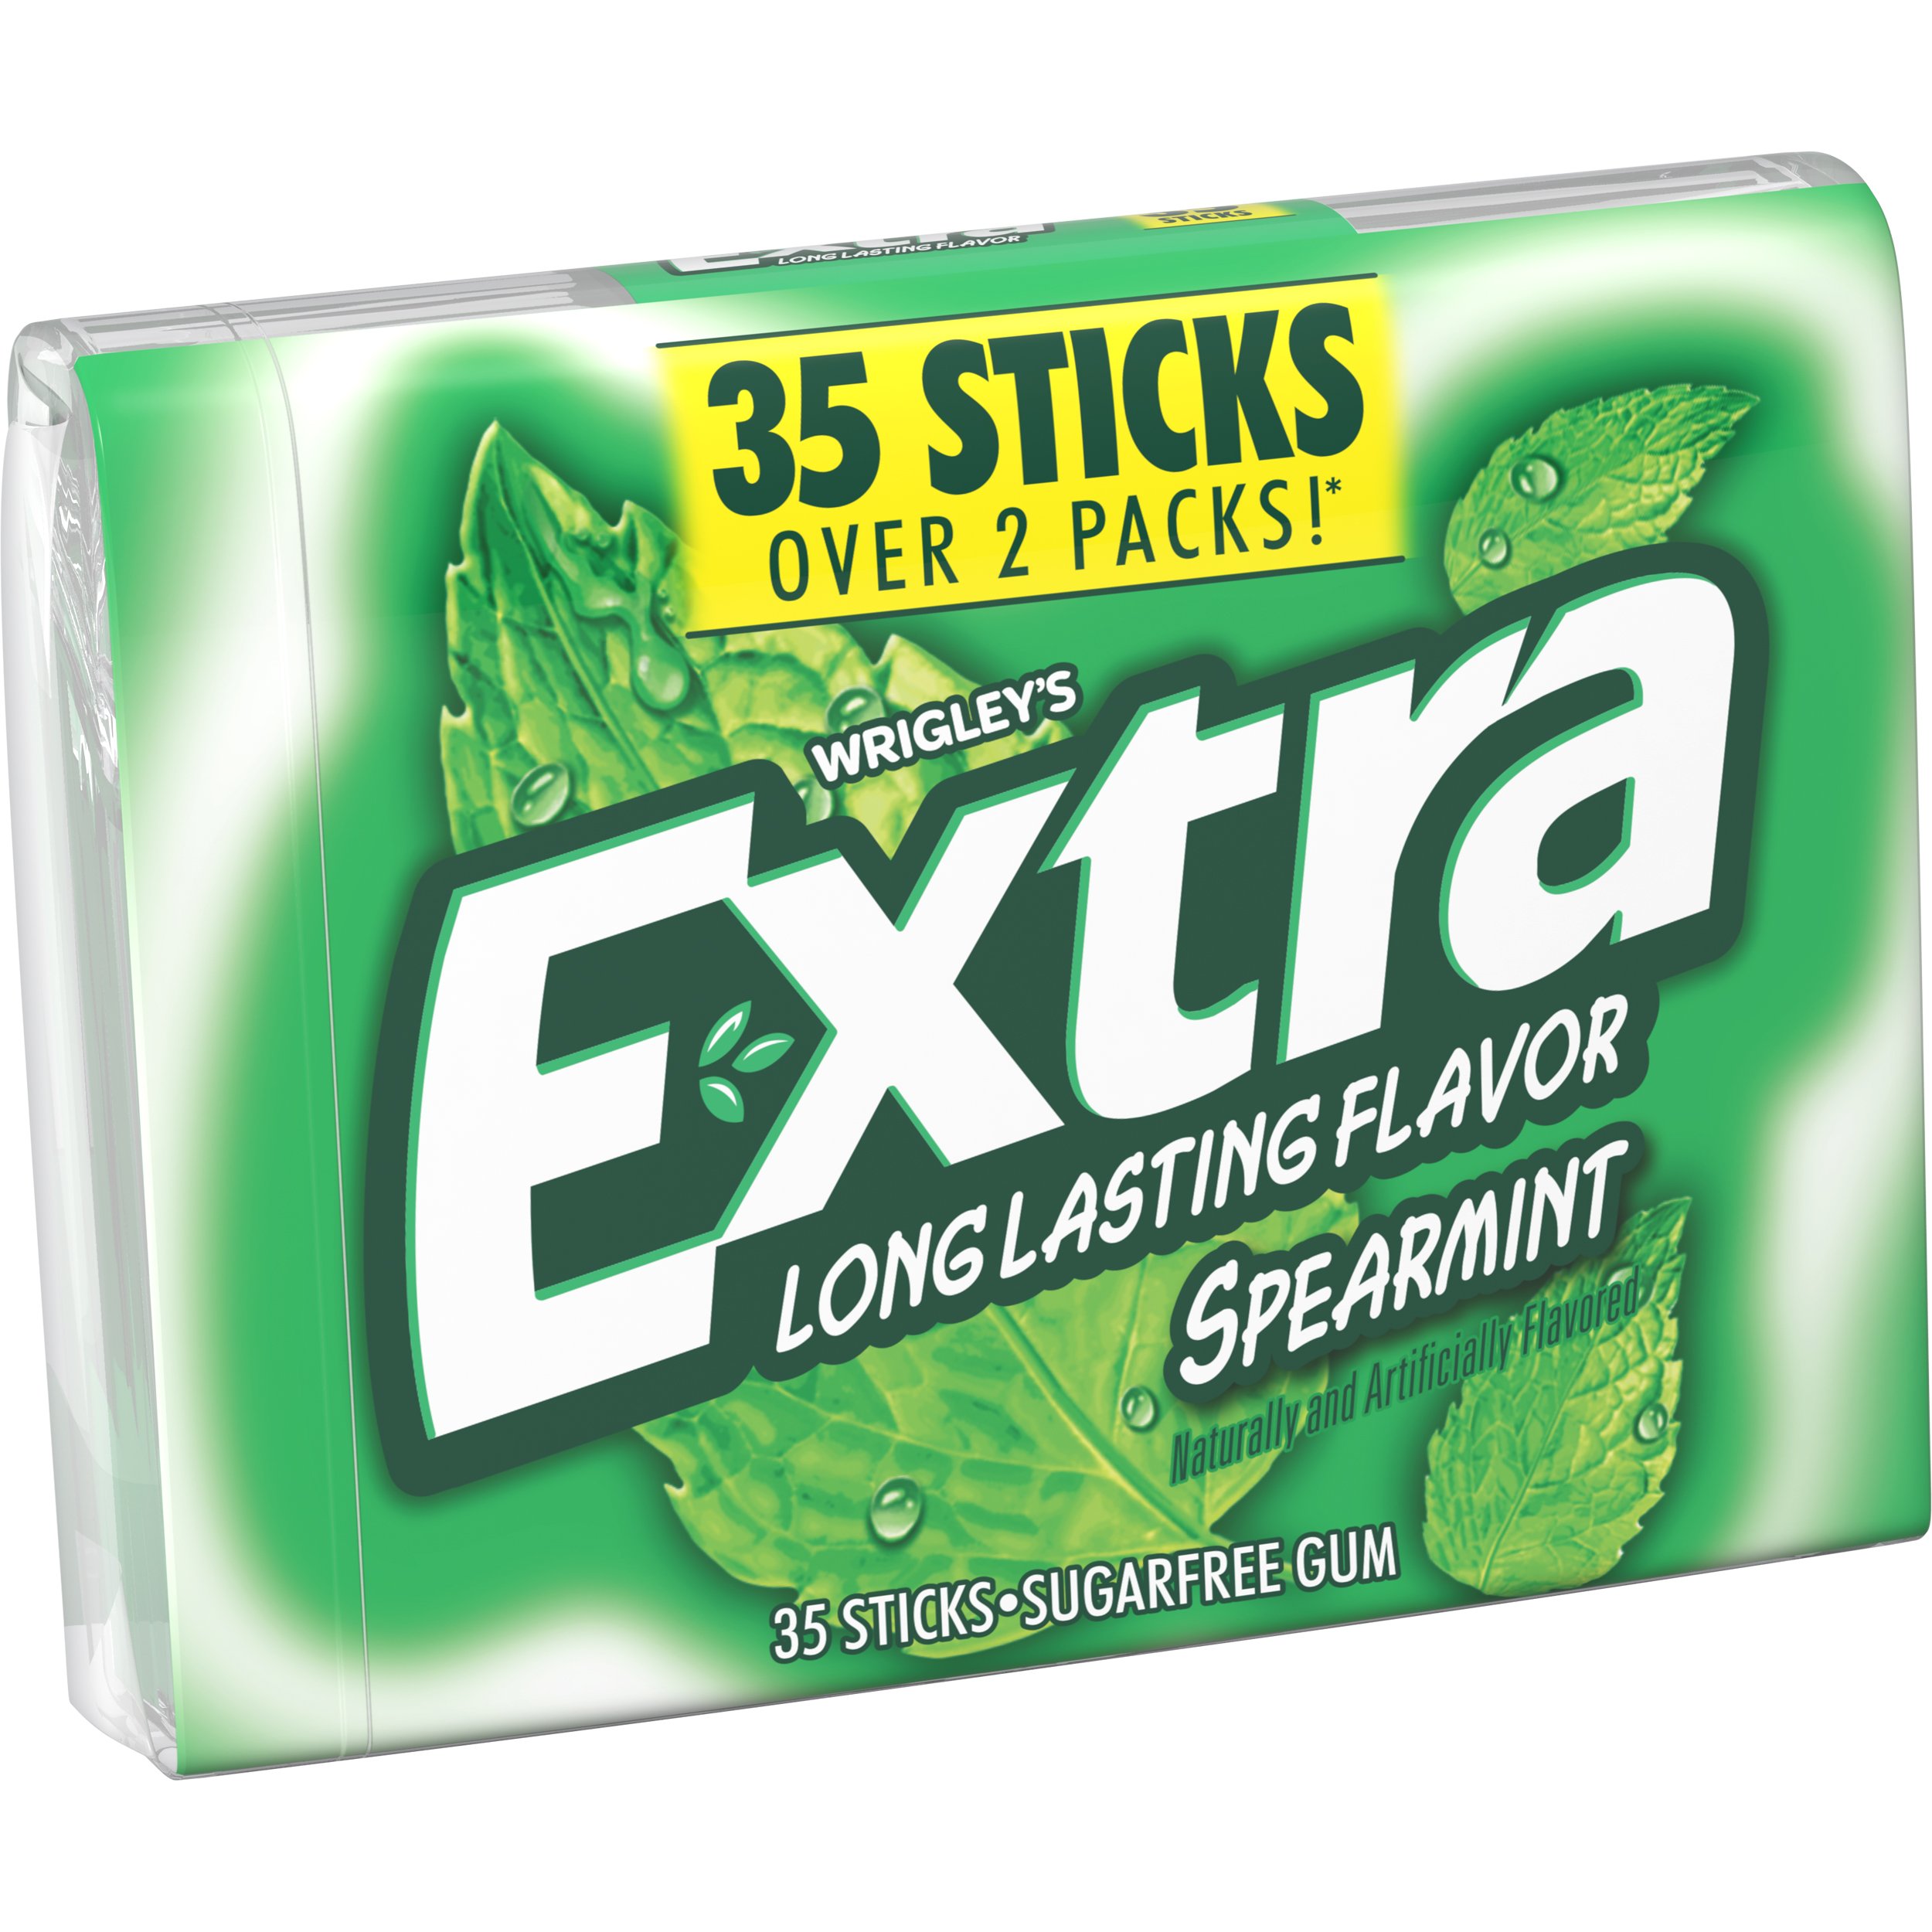 Extra Spearmint Sugar Free Chewing Gum, 35 Piece Pack